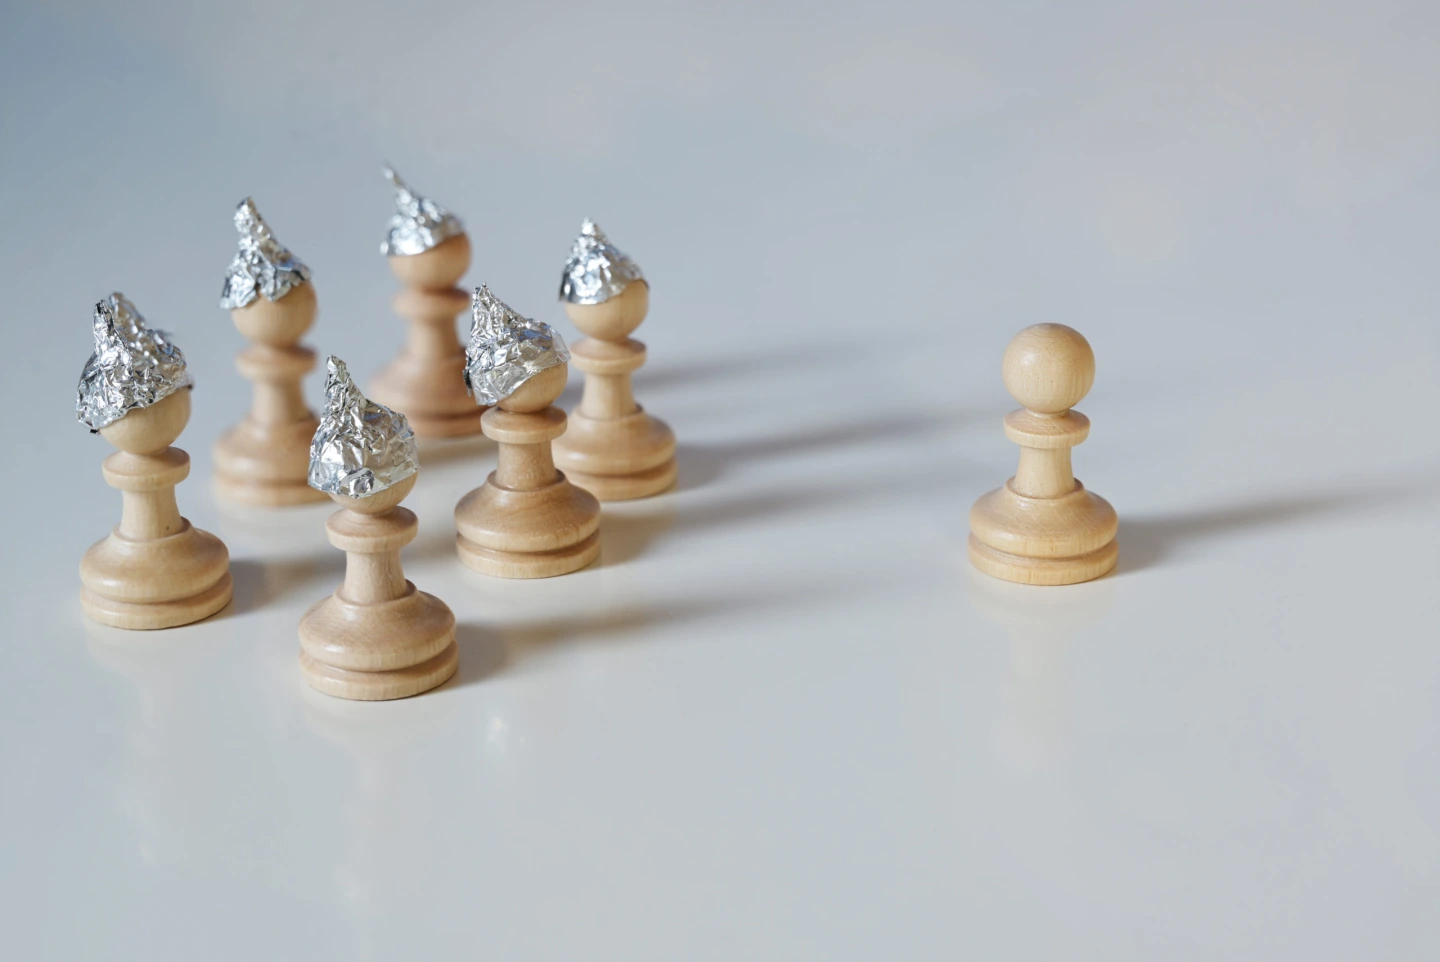 Group of pawn chess pieces with tinfoil hats against imagined heteronomy stand towards a piece without hat, conspiracy theory and manipulation concept in coronavirus time